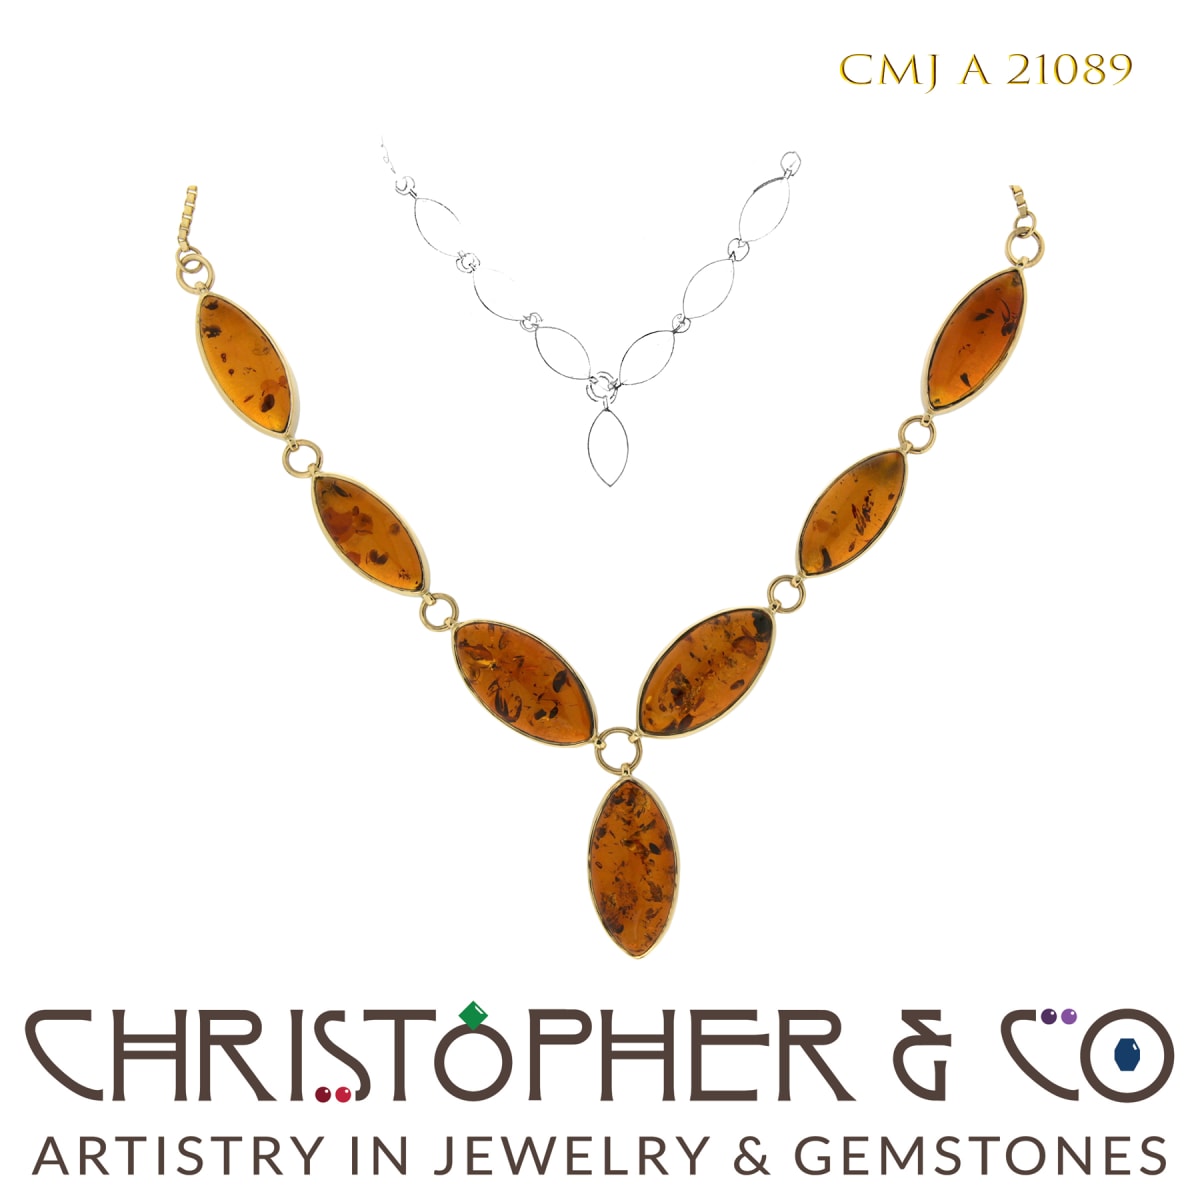 CMJ A 21089 Gold necklace by Christopher M. Jupp set with seven Amber cabachons.  Image: CMJ A 21089 Gold necklace by Christopher M. Jupp set with seven Amber cabachons.